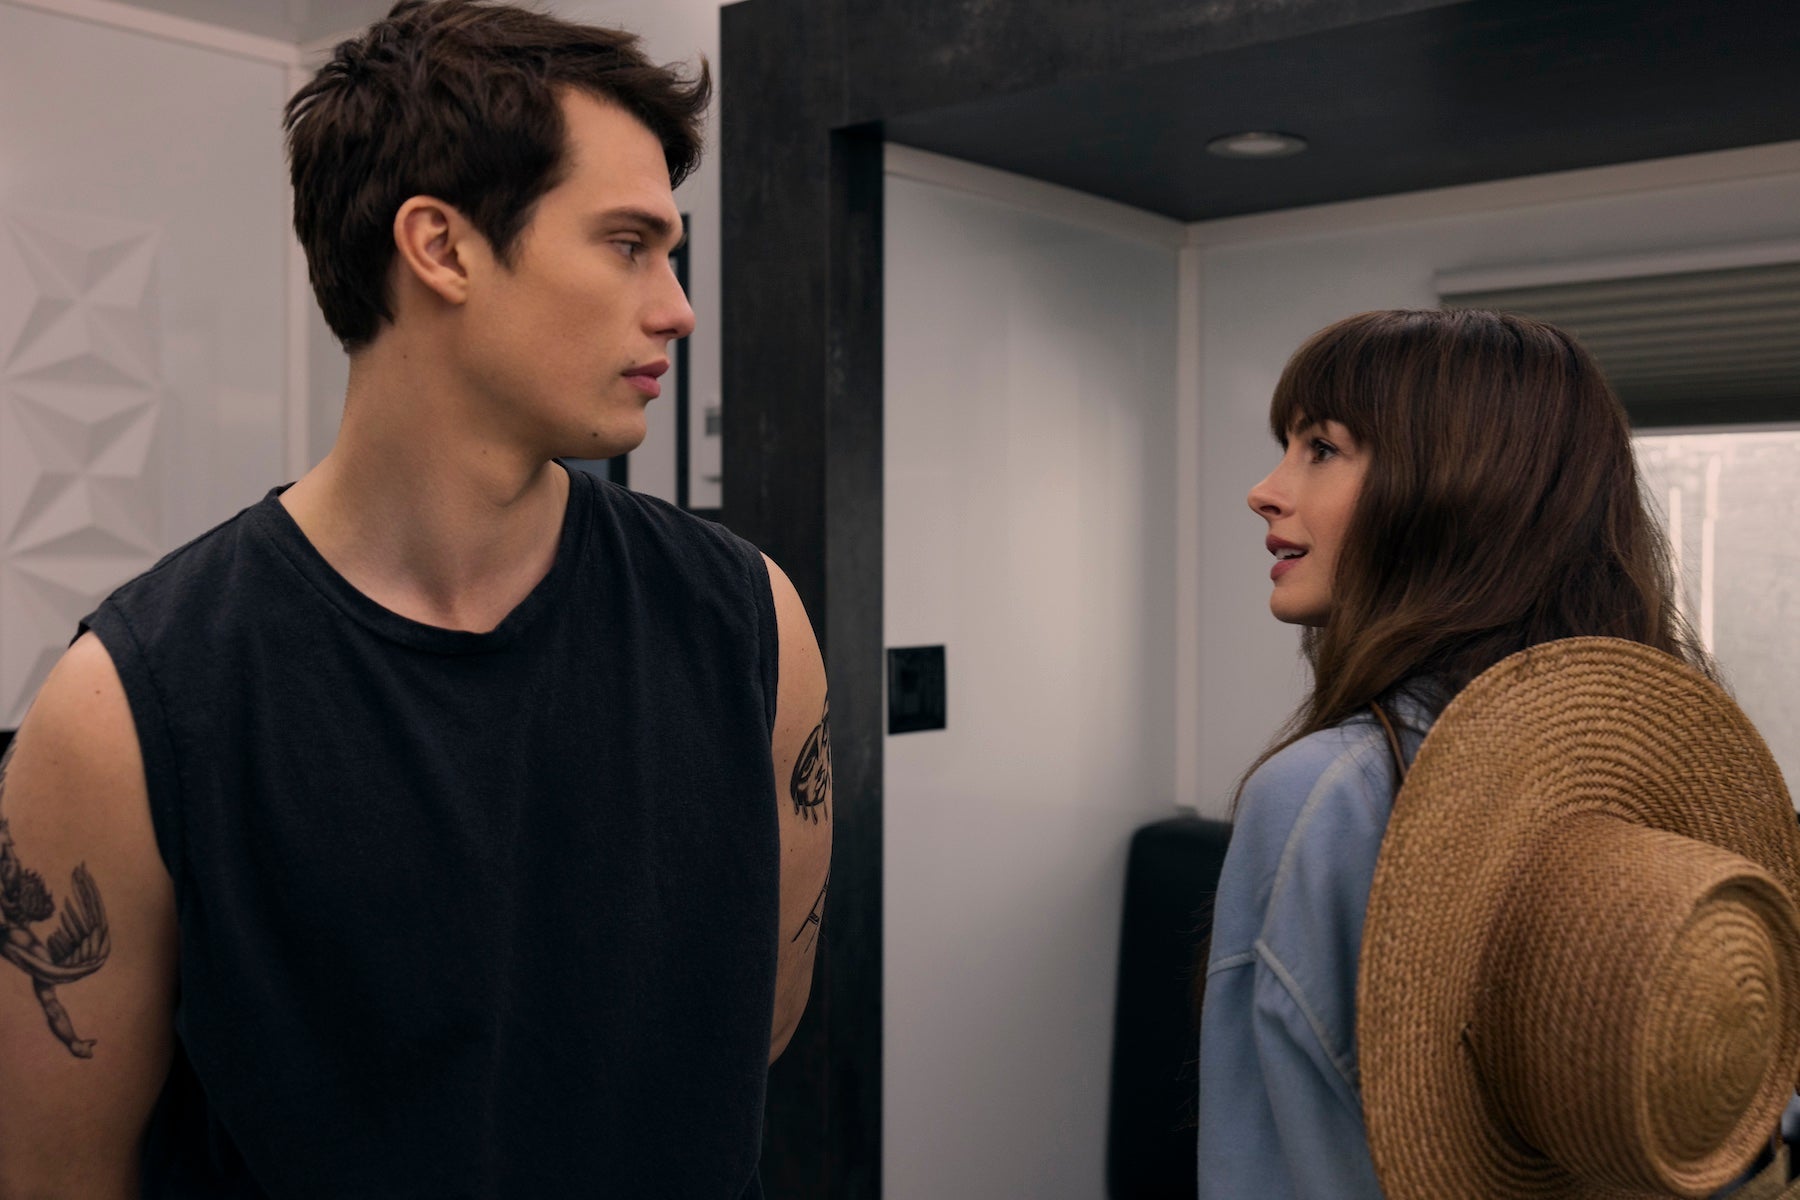 Still from 'The Idea of You' featuring Anne Hathaway and Nicholas Galitzine gazing at each other in a hallway